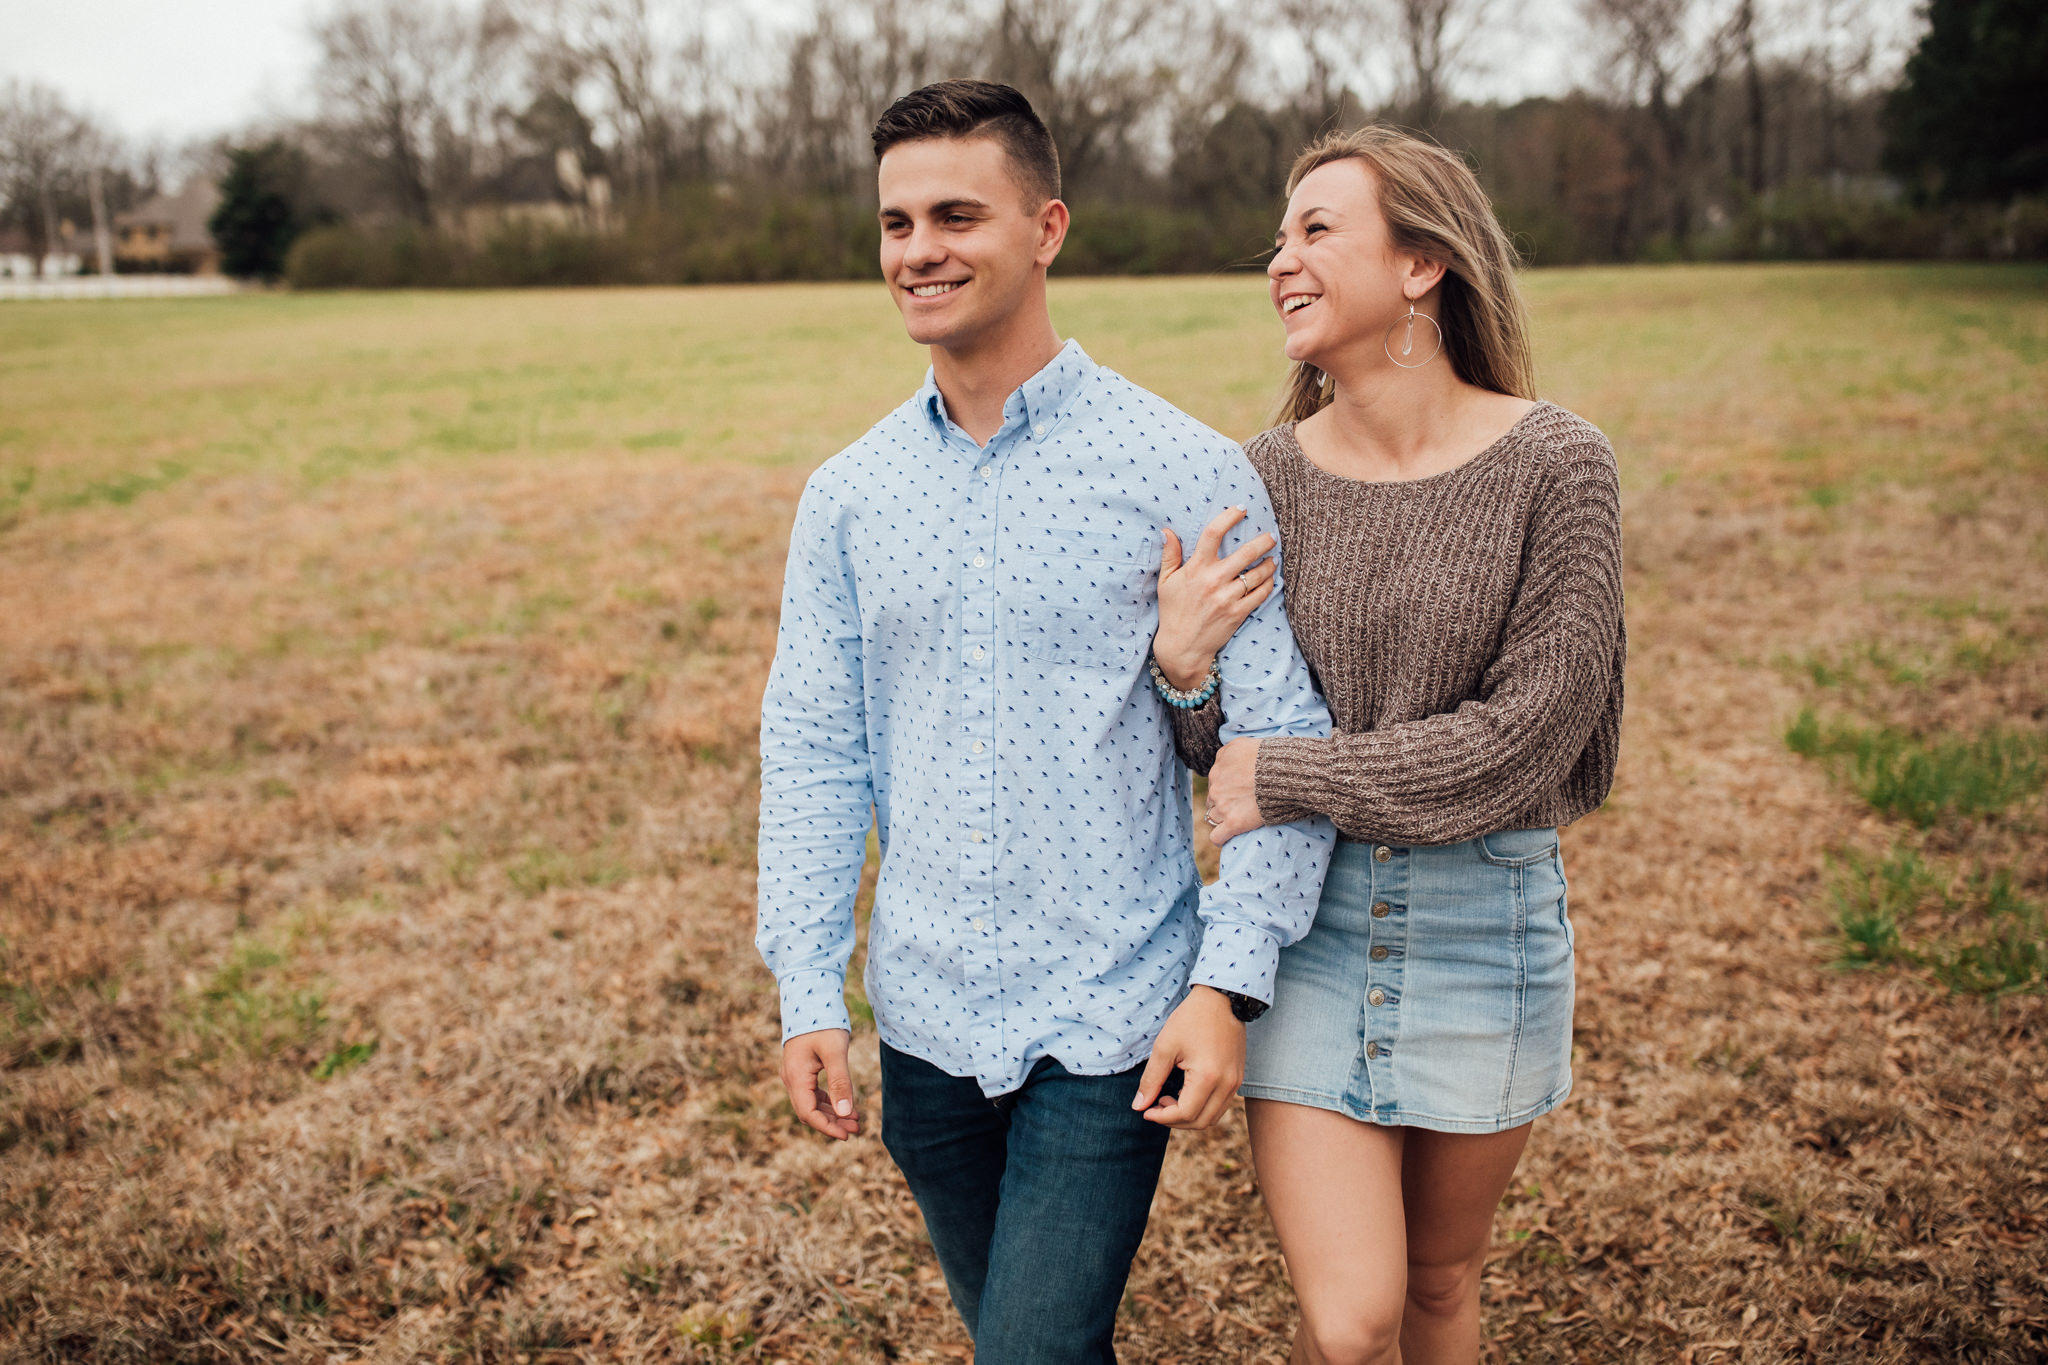 memphis-engagement-photographer-thewarmtharoundyou-greenhouse-engagement-pictures (68 of 118).jpg